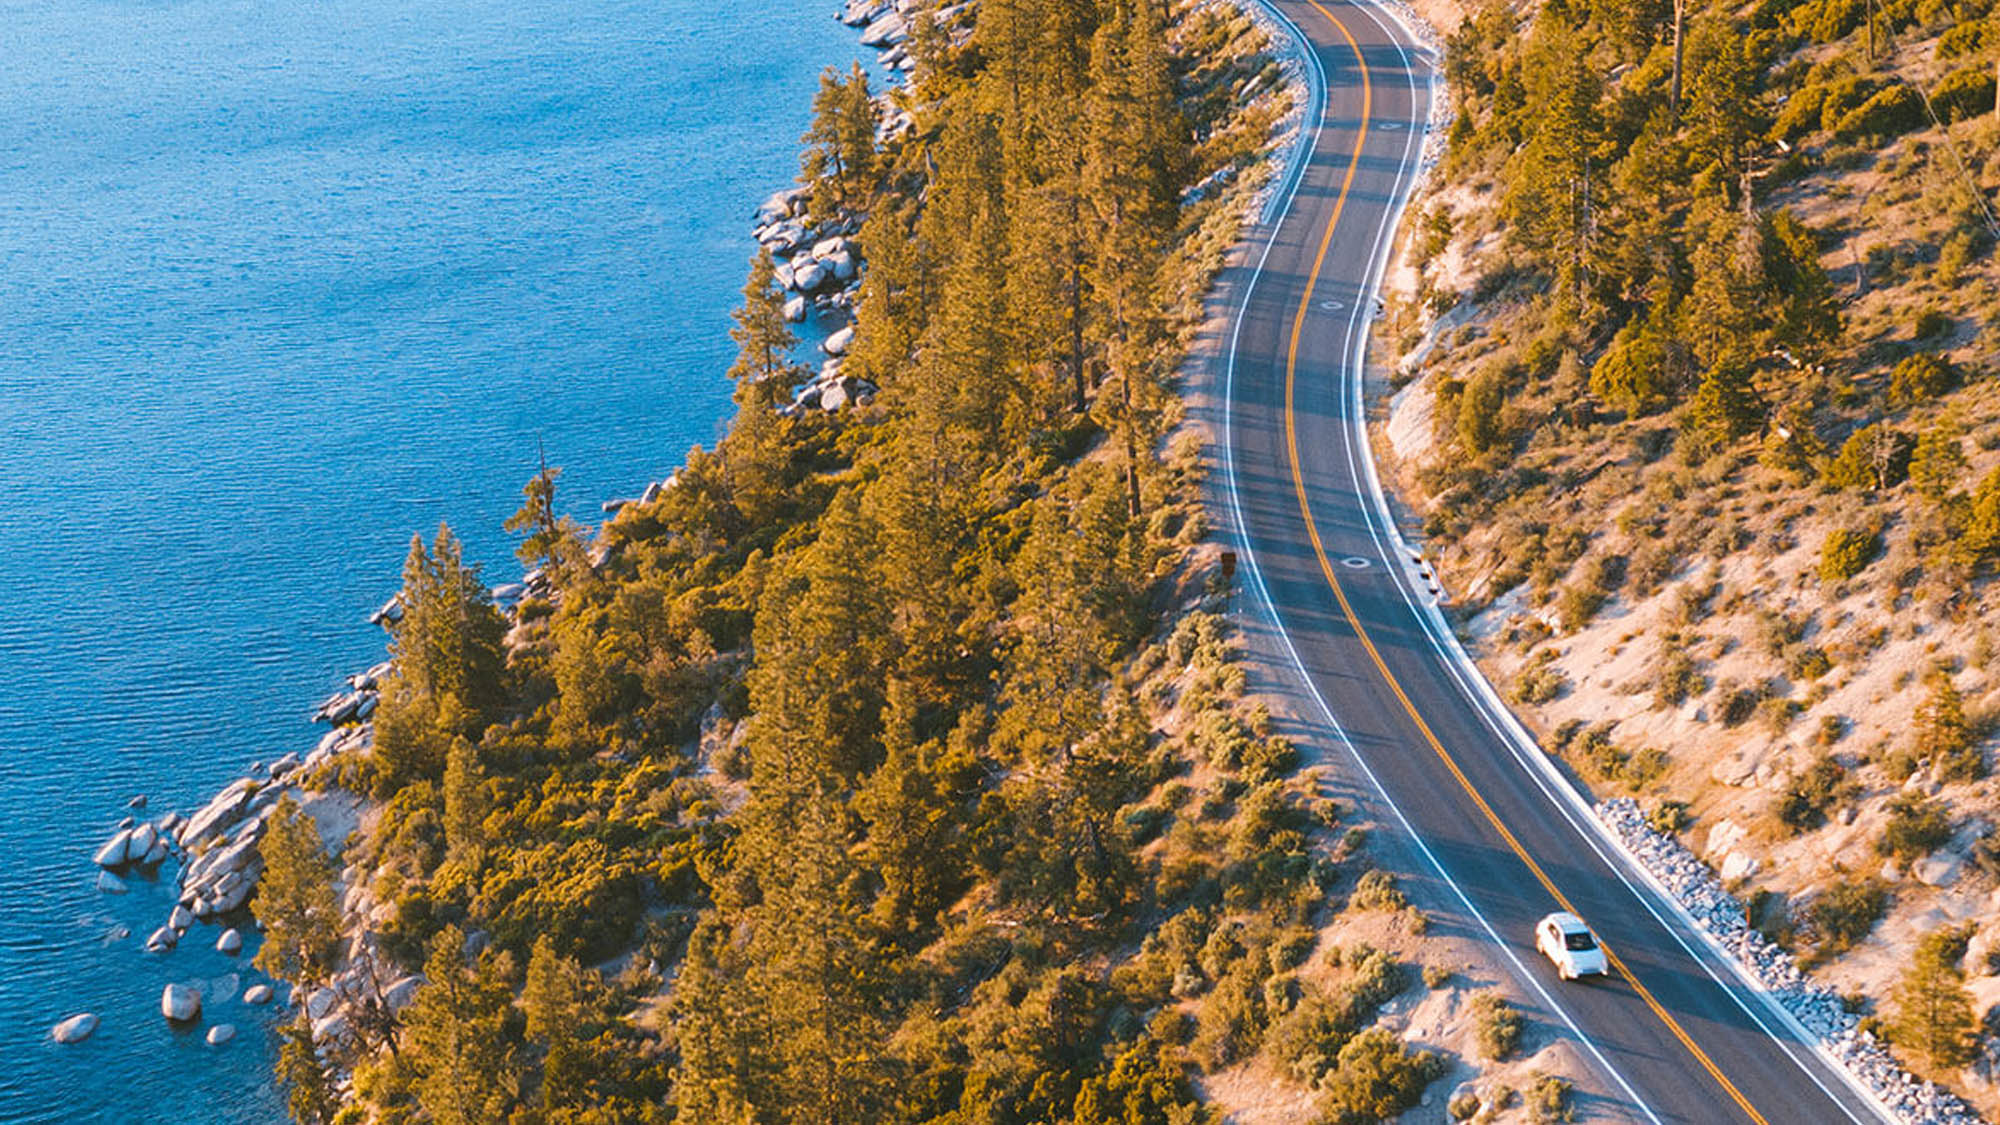 Directions to lake tahoe